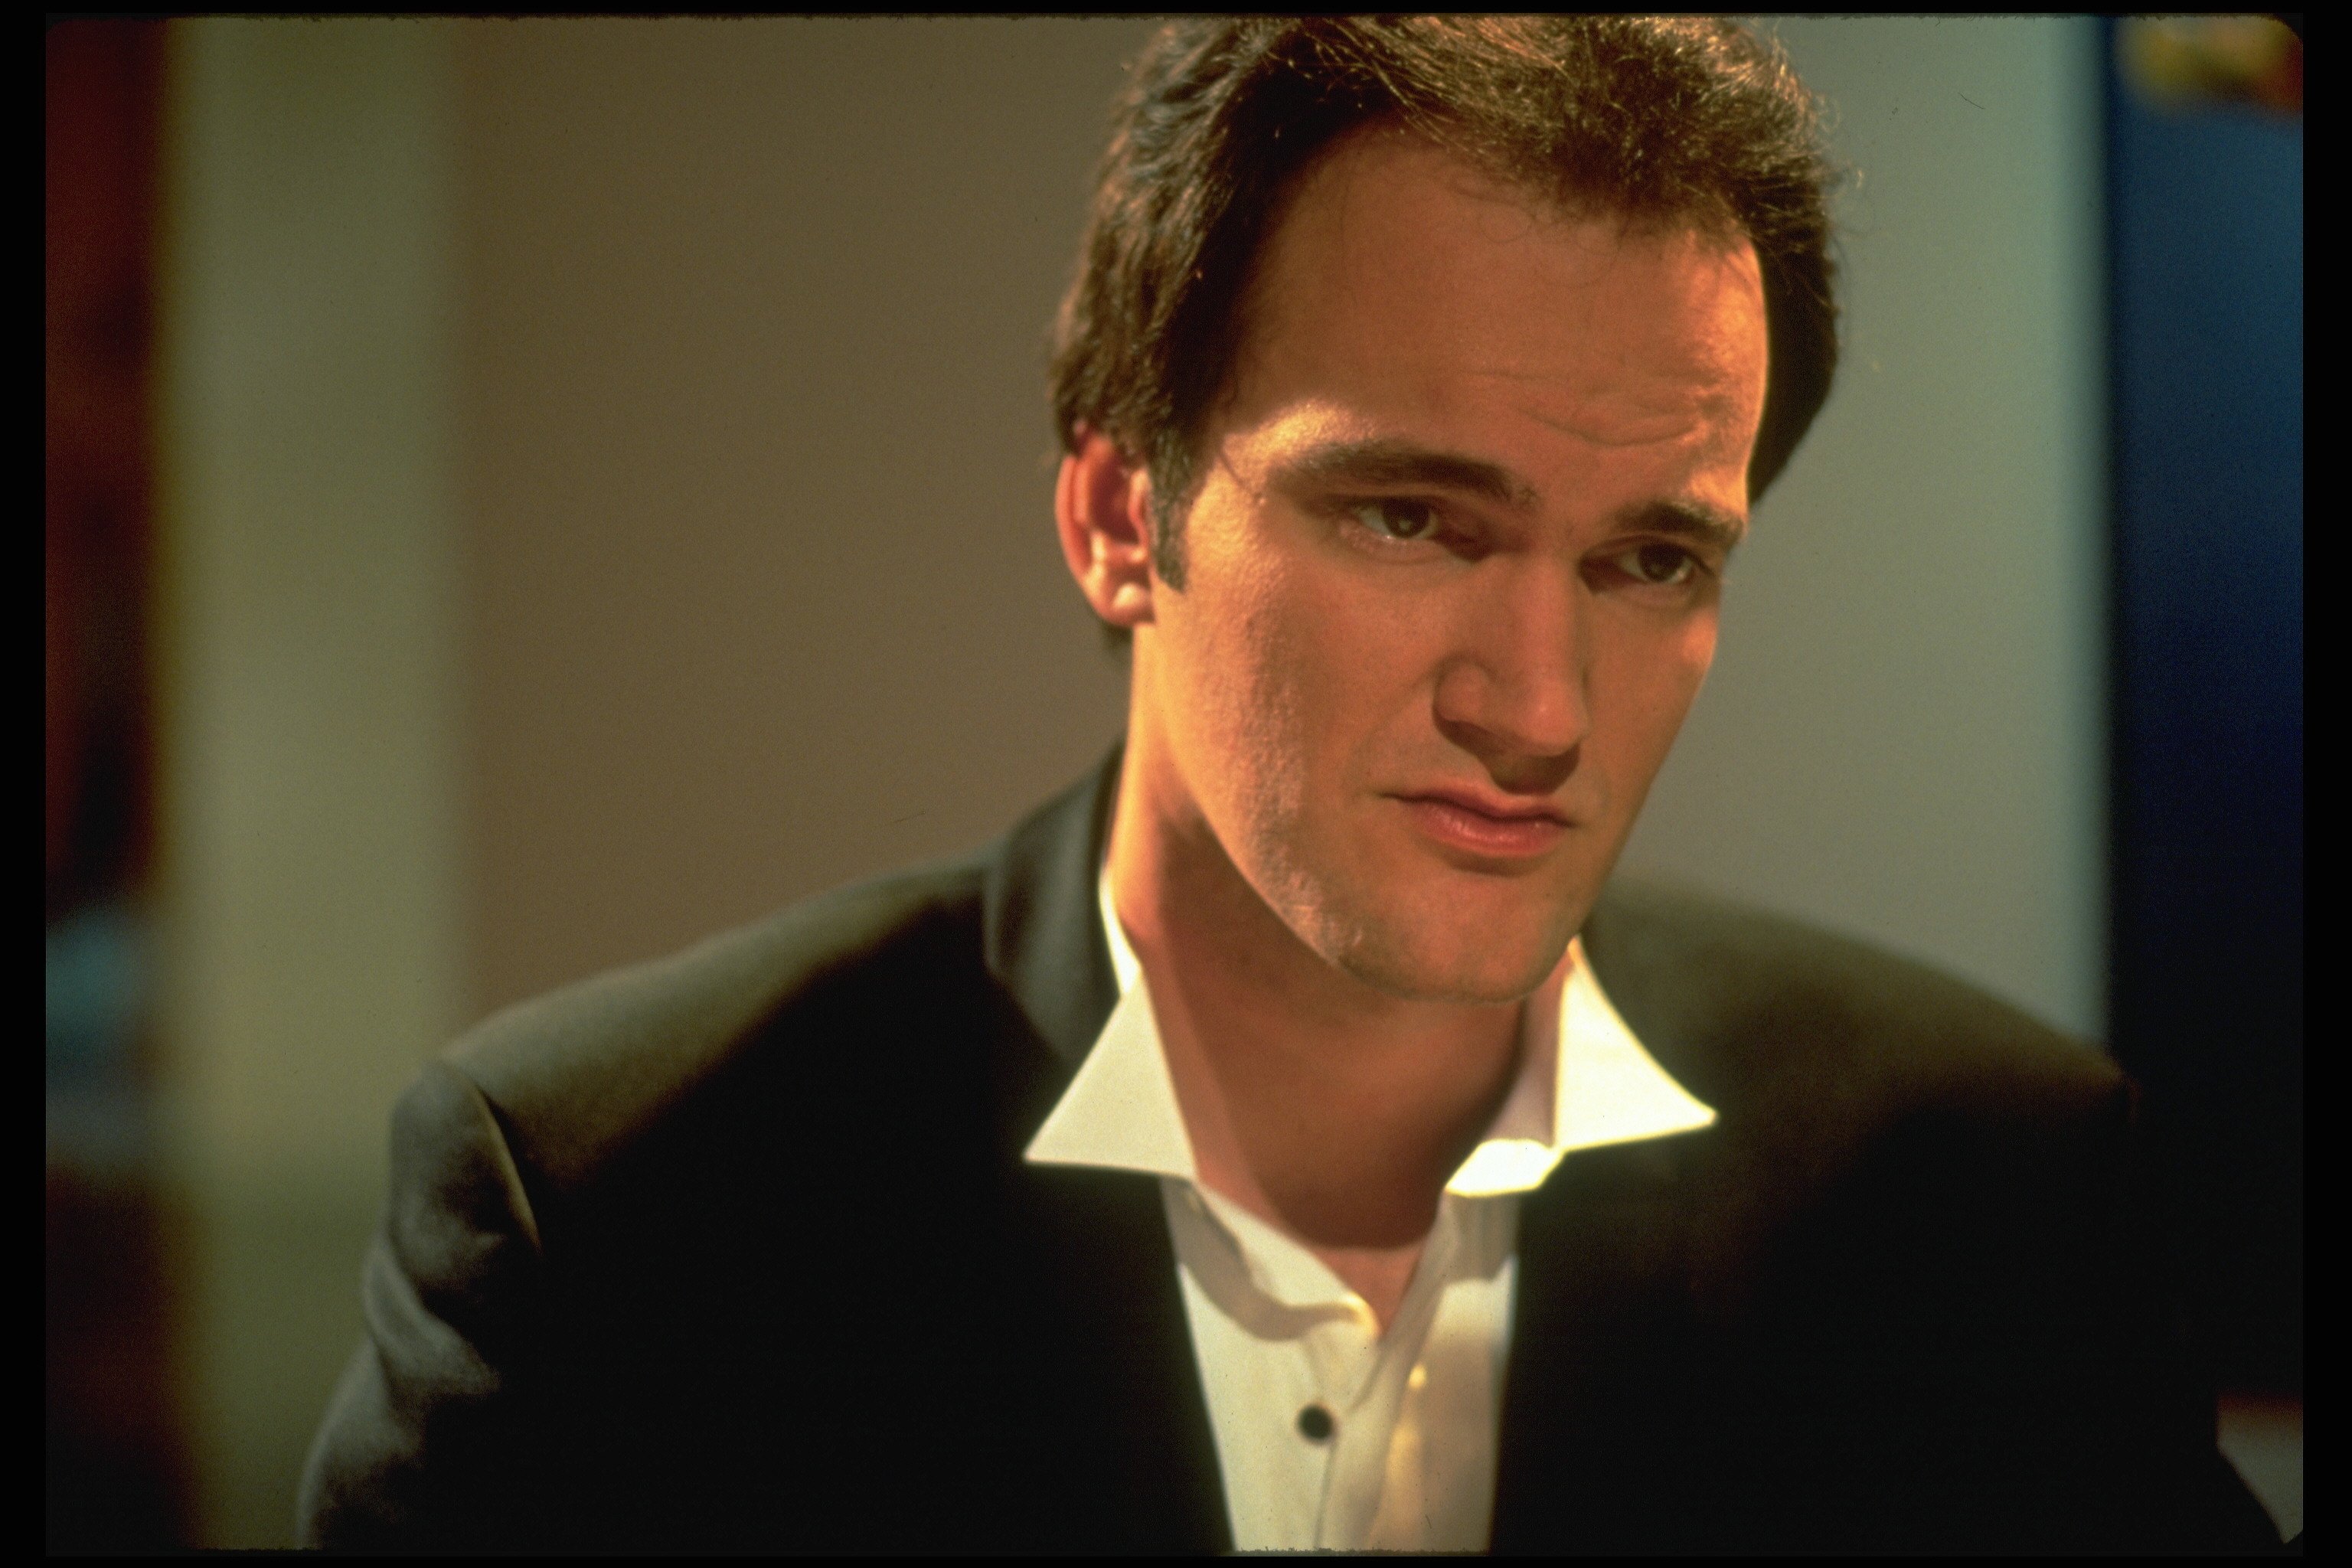 Quentin Tarantino in a suit